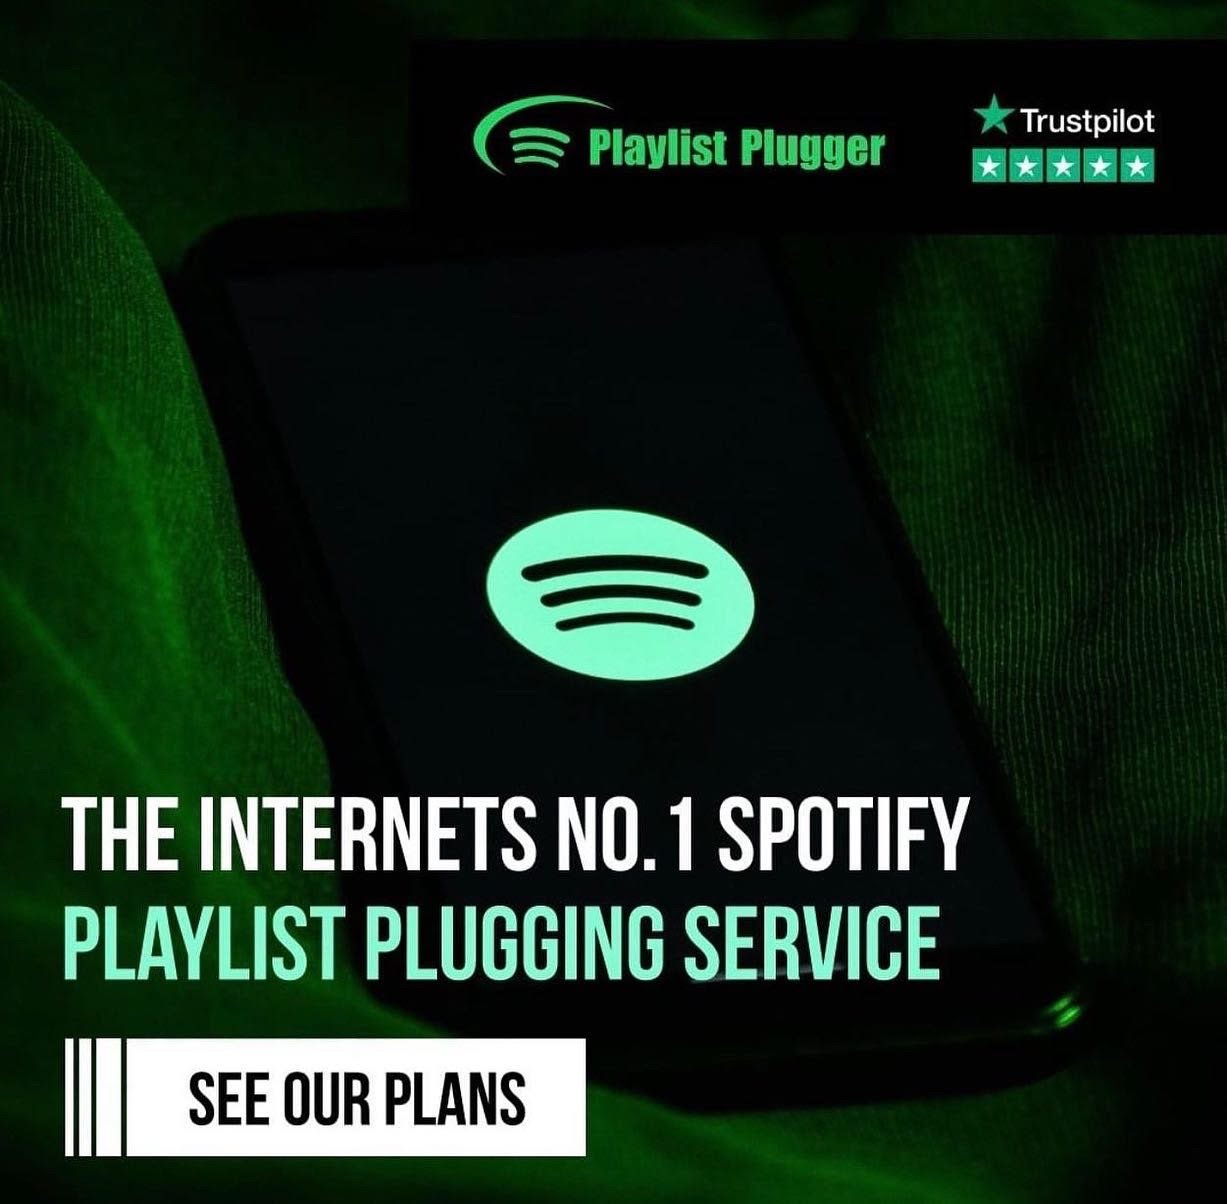 Get Your Indie Band Featured On Spotify Playlists With This DFY Pitching Service